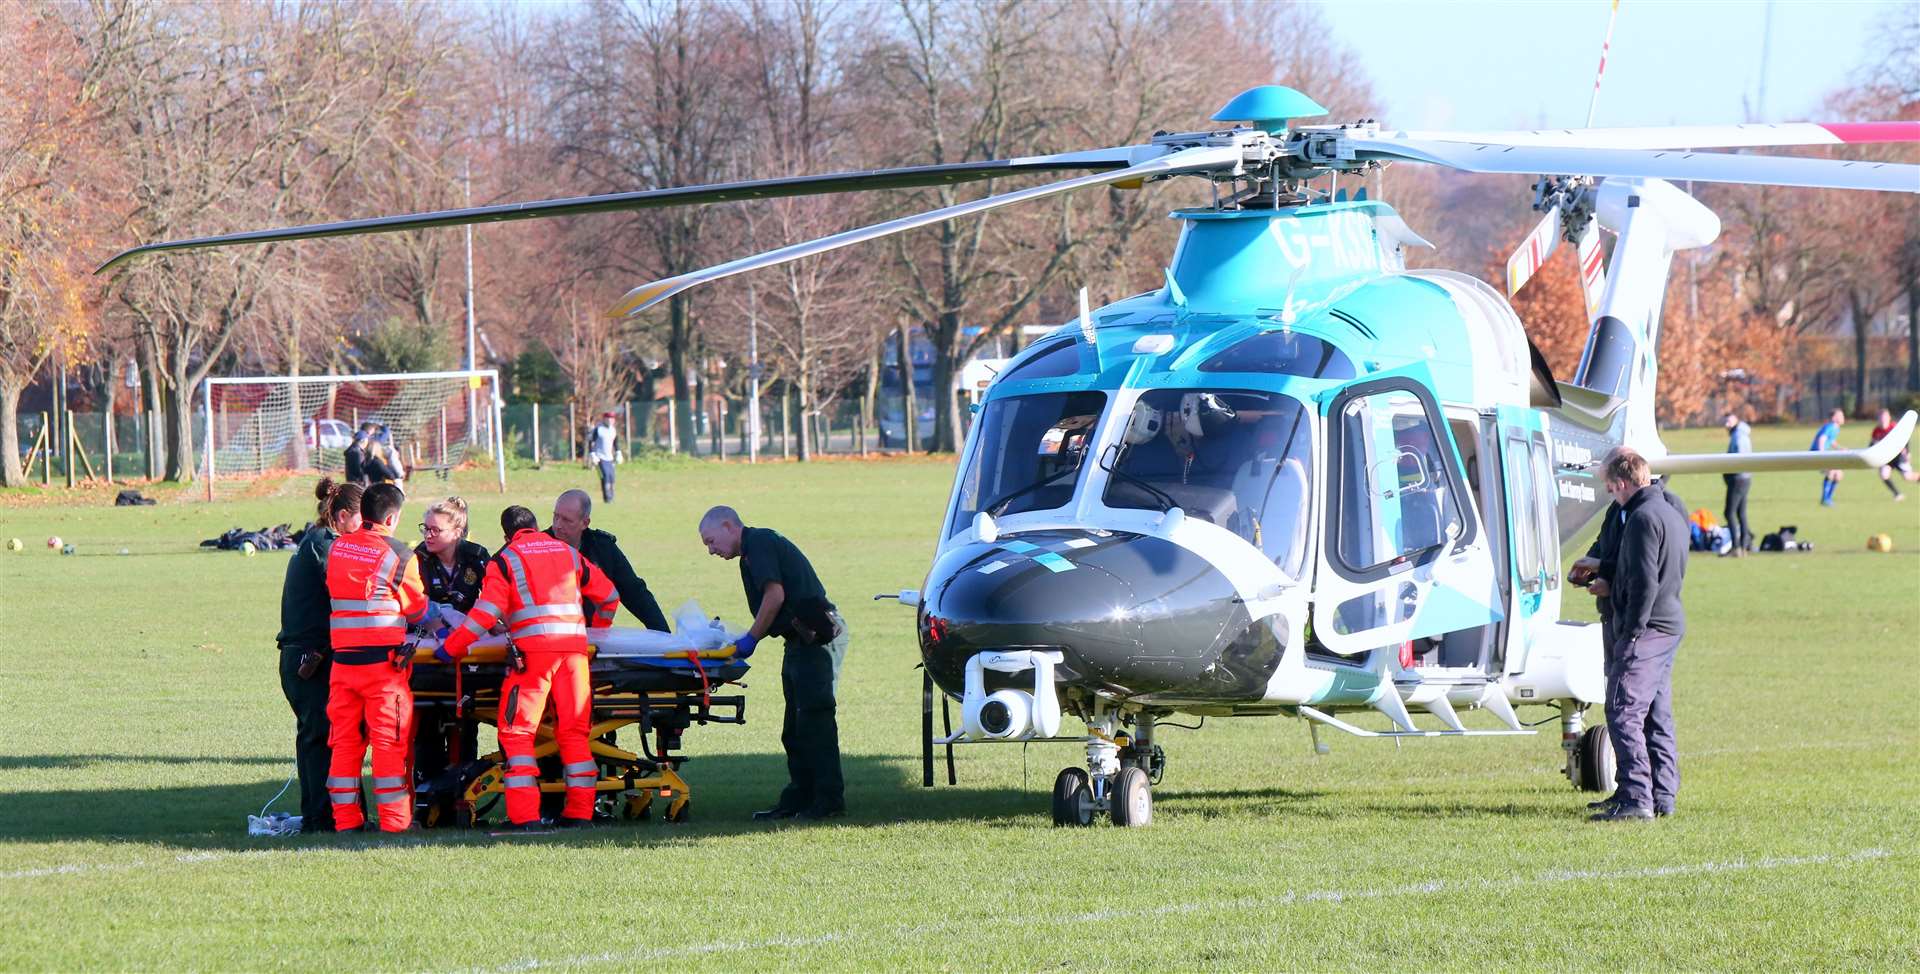 Student is put on board the helicopter Picture: UKNIP